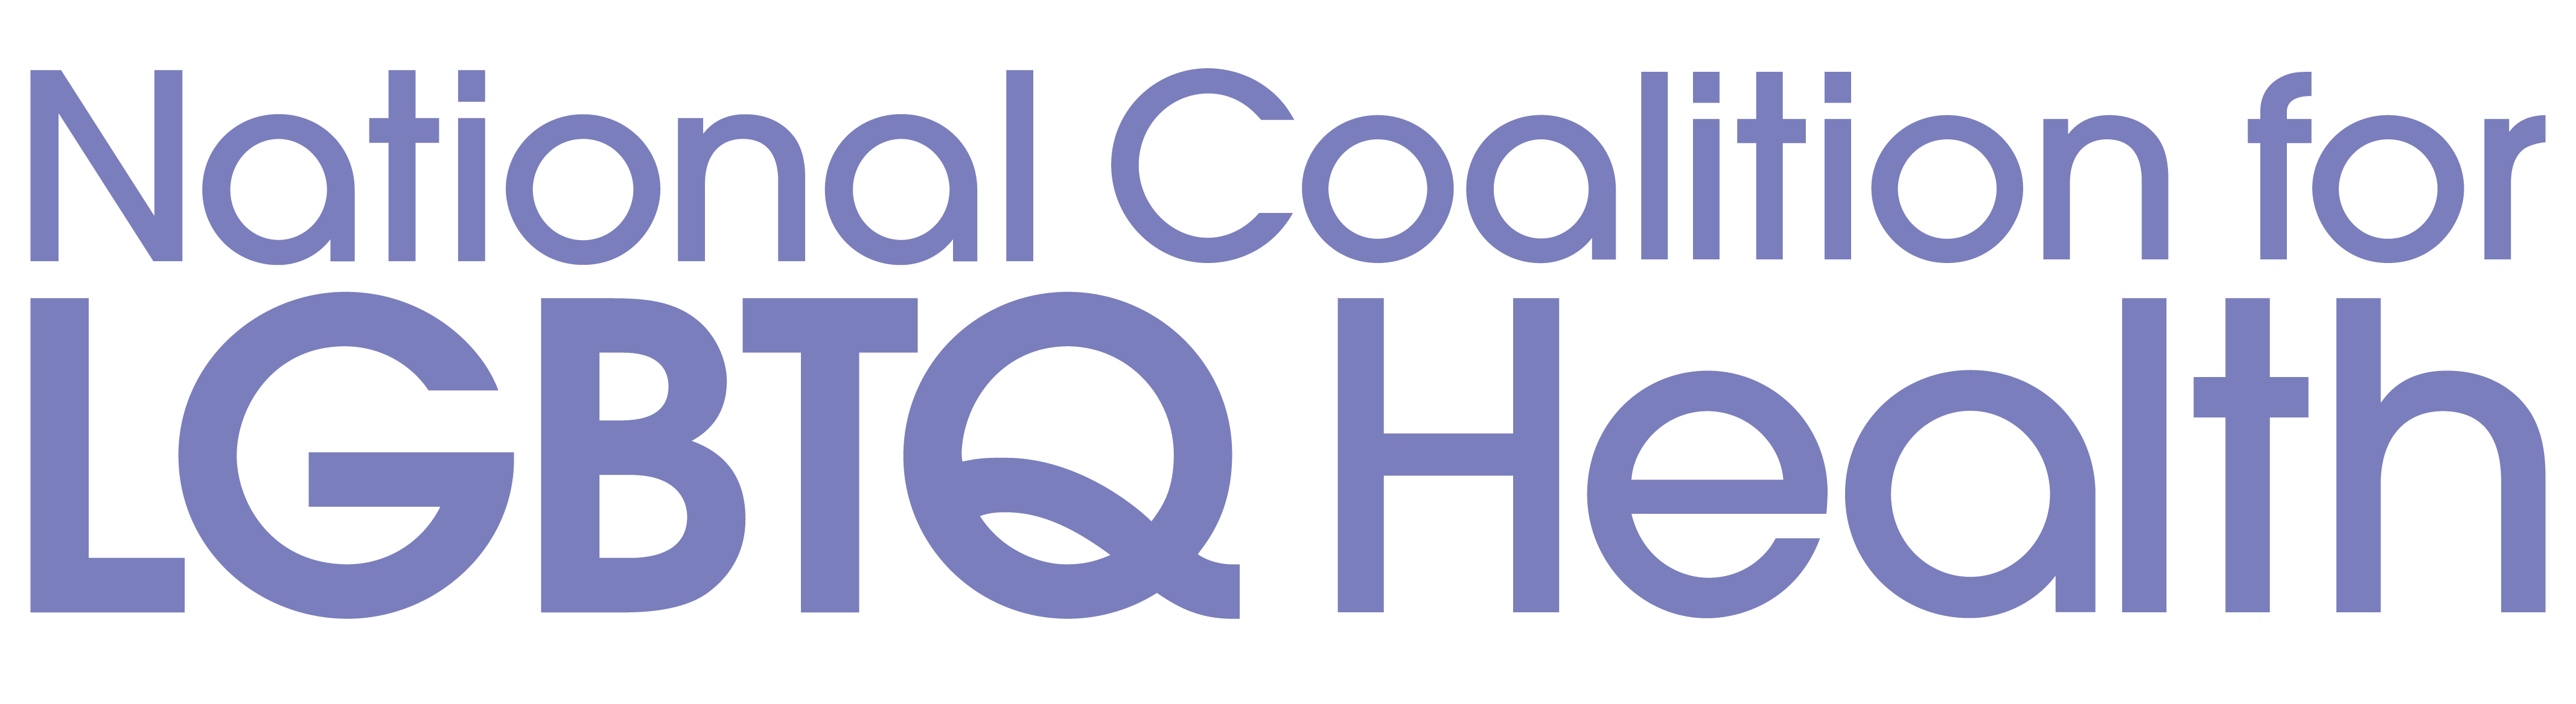 National Coalition for LGBTQ Health